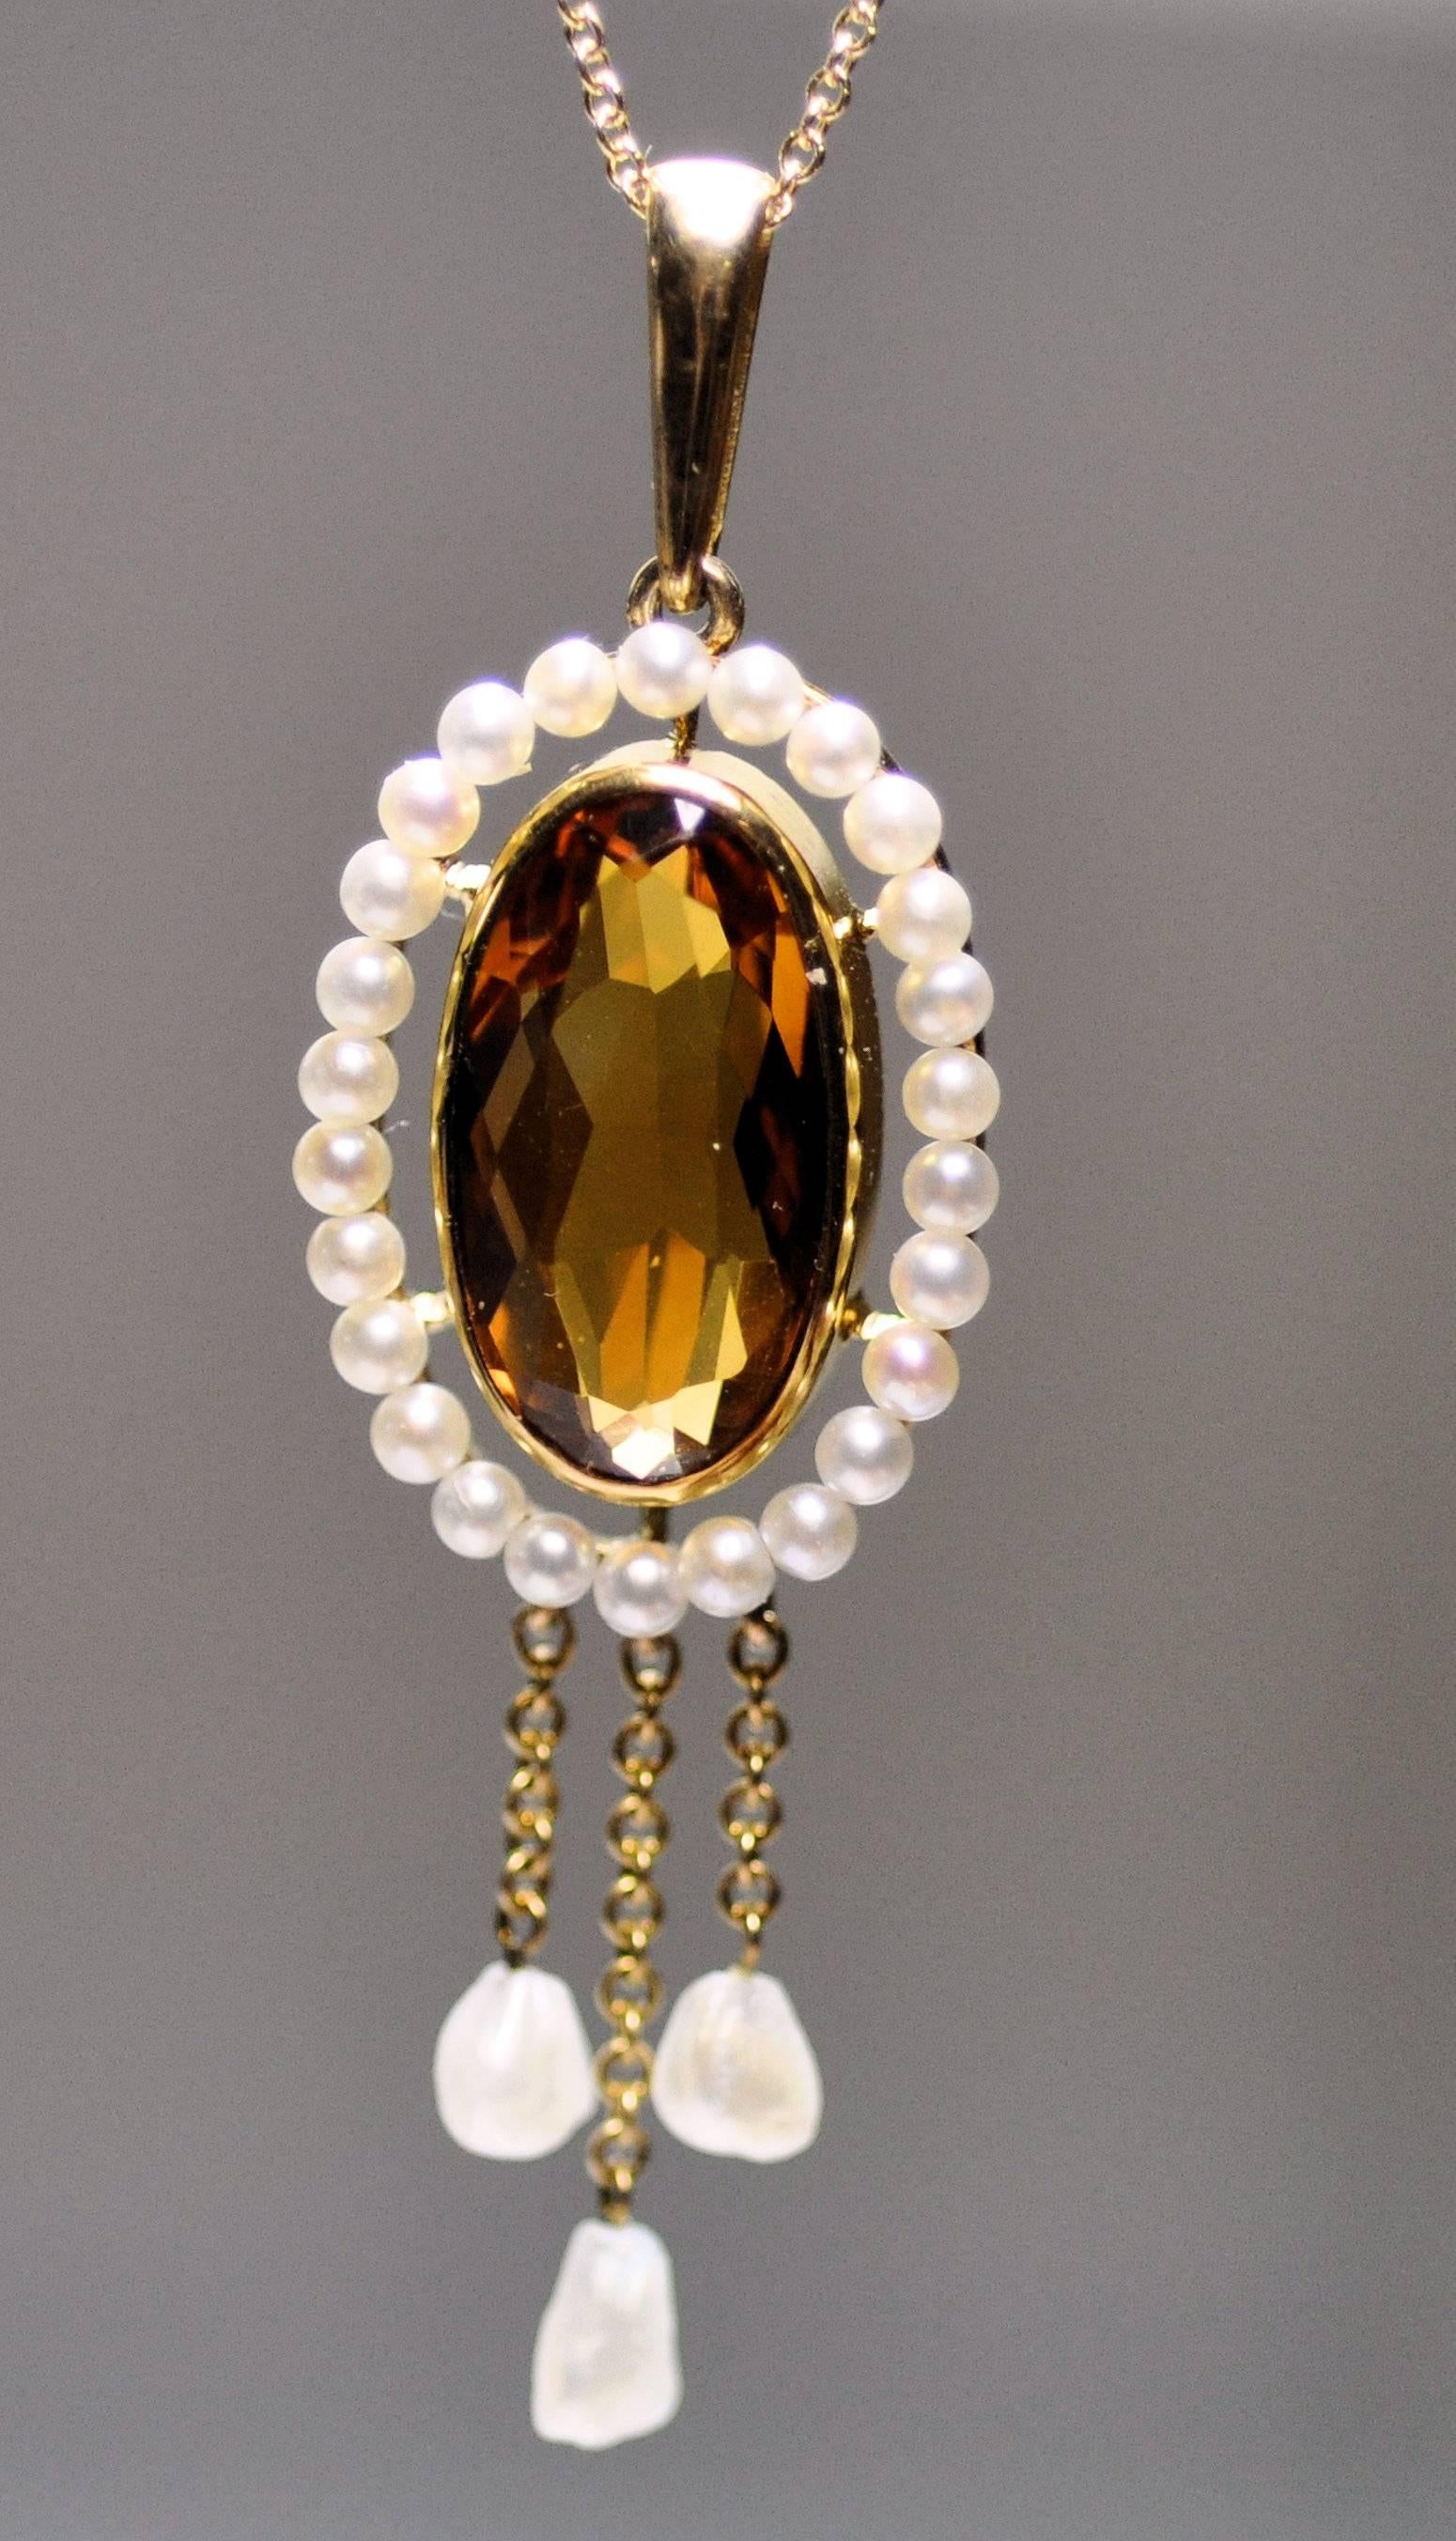 Antique lavaliere pendant with bezel set dark amber color citrine.  Measures 16 x 9 mm.  Surrounded by seed pearls 2 mm. and three pendants of gold chain and American Mississippi River fresh water pearls.  14K yellow gold cable chain 18 inches long.